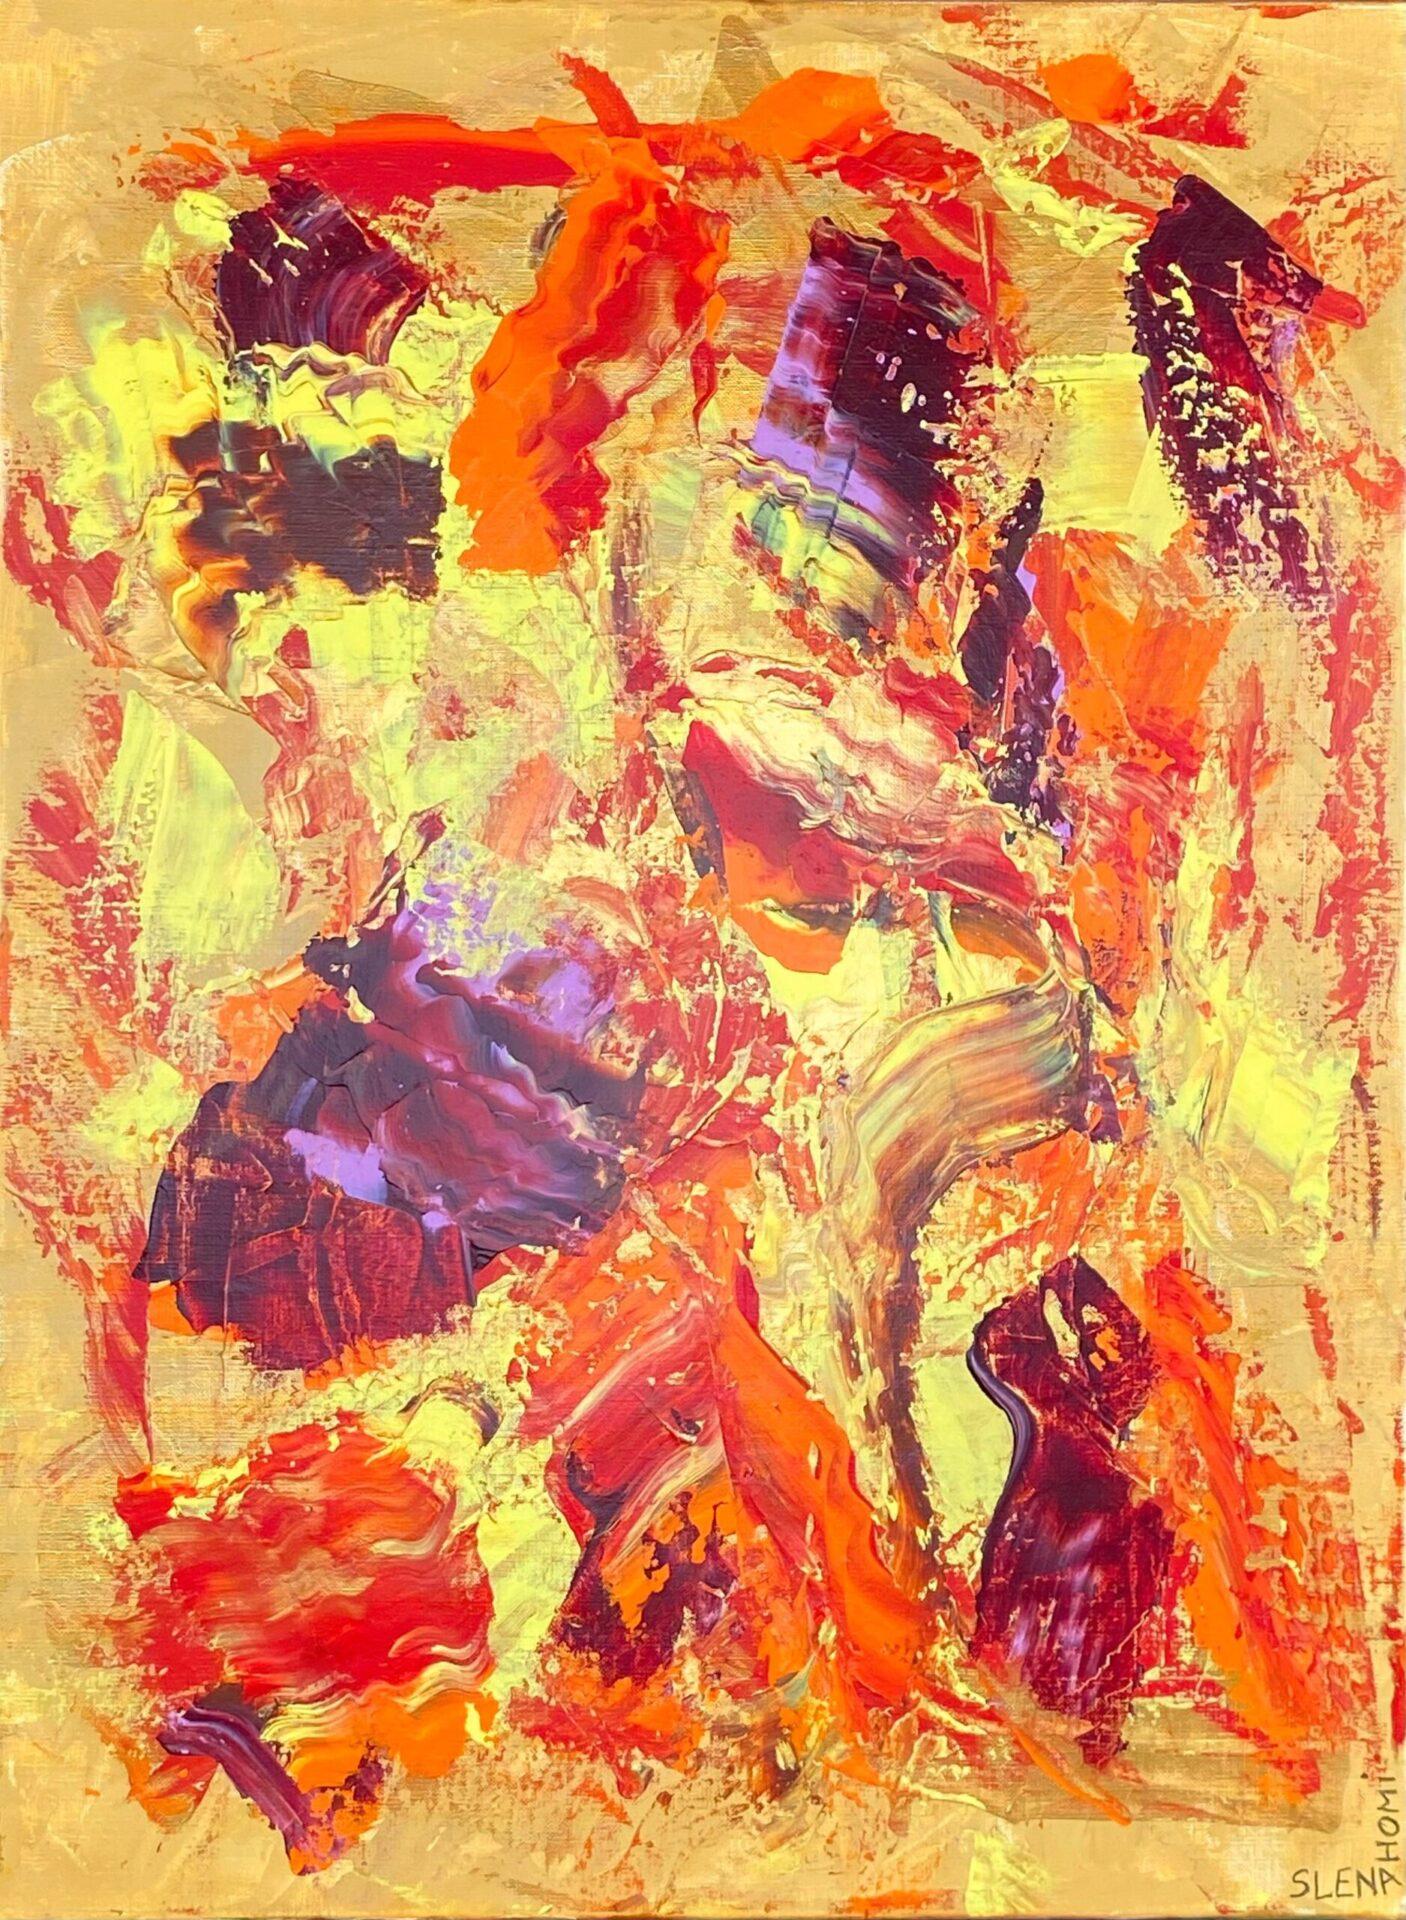 Holi 7 - Painting by Slenahomi